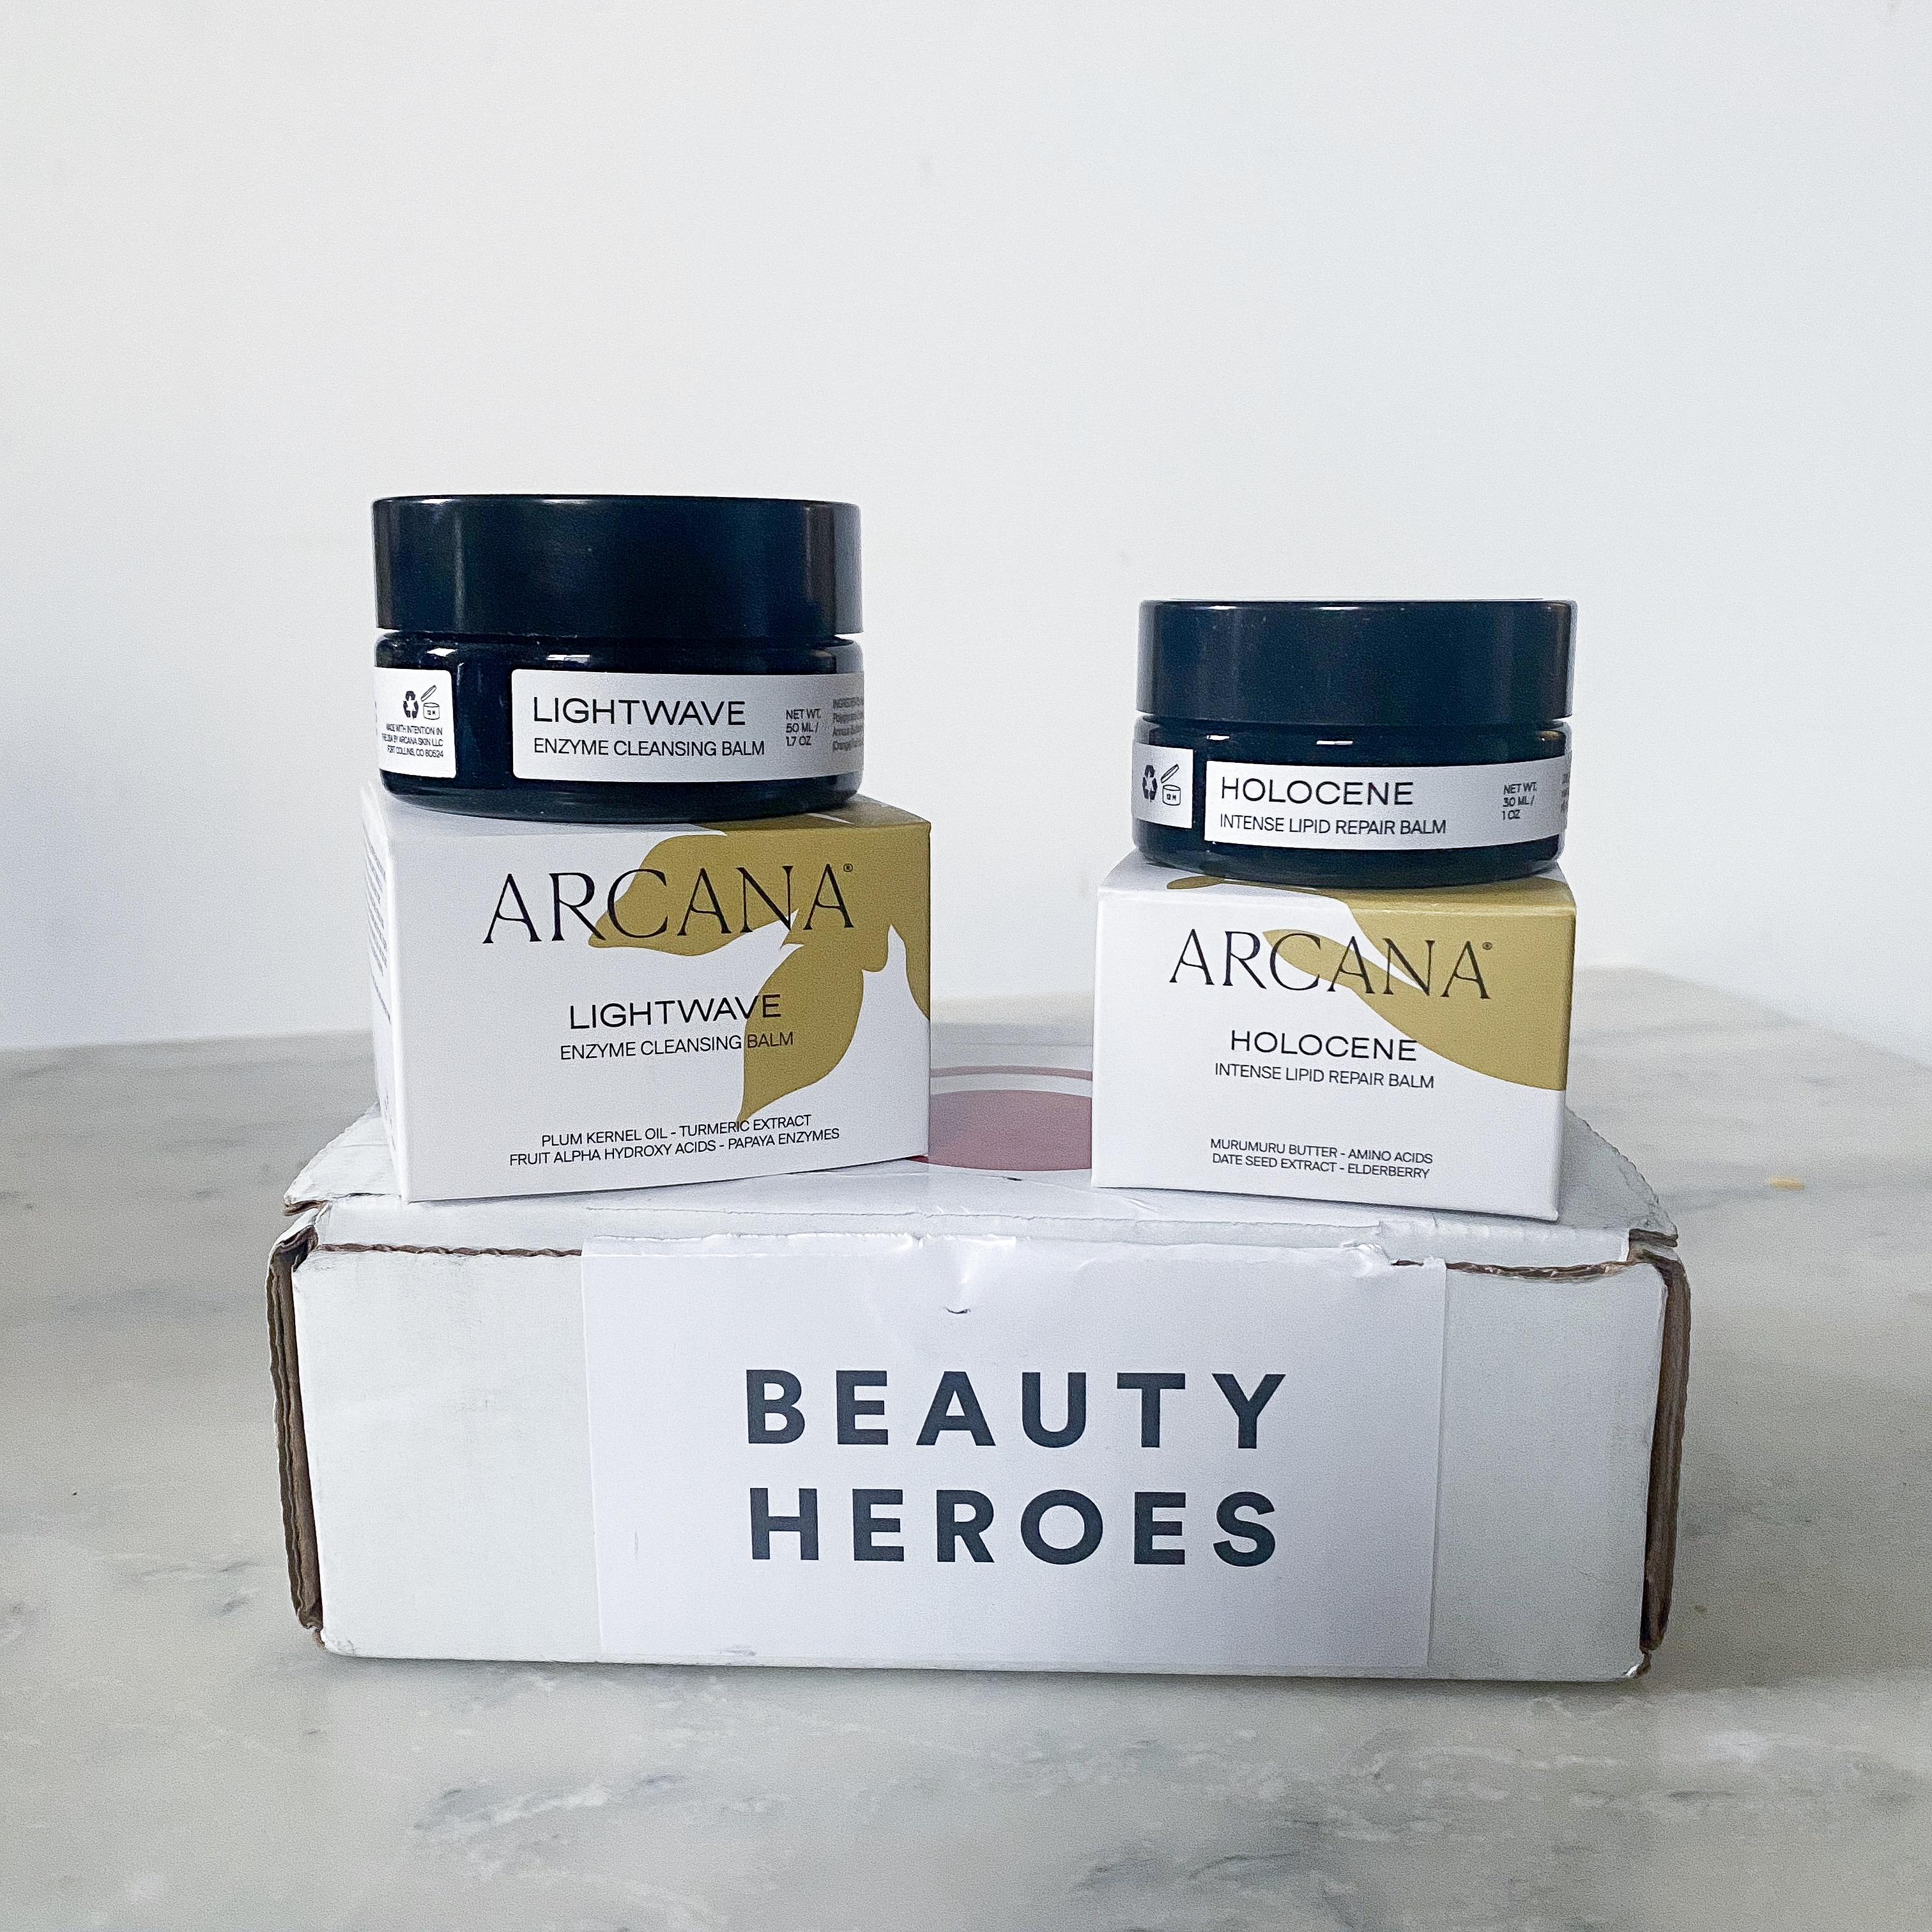 Beauty Heroes Beauty Discovery December 2021 Review